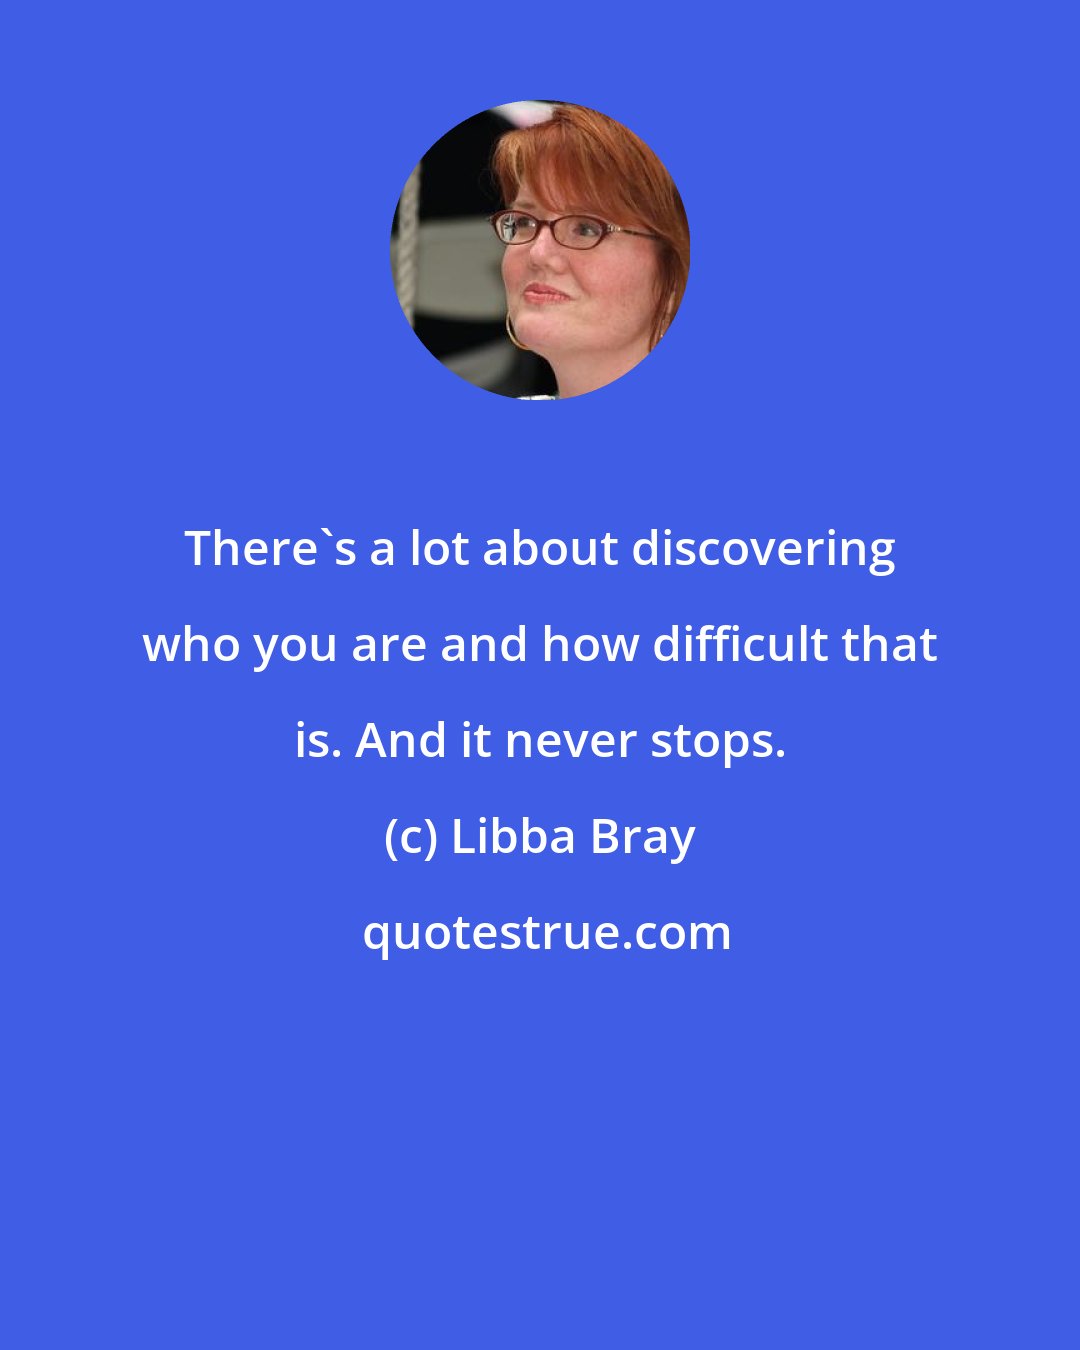 Libba Bray: There's a lot about discovering who you are and how difficult that is. And it never stops.